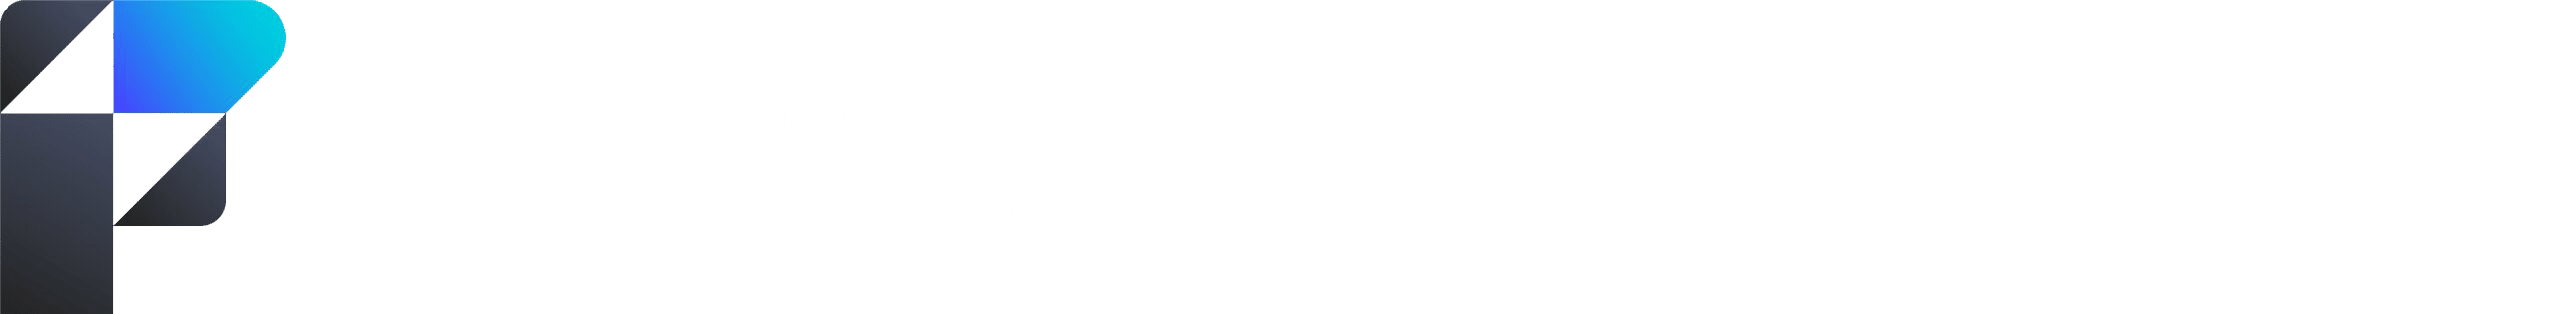 Logo for FileMaker Pro, used in our FileMaker QuickBooks integration